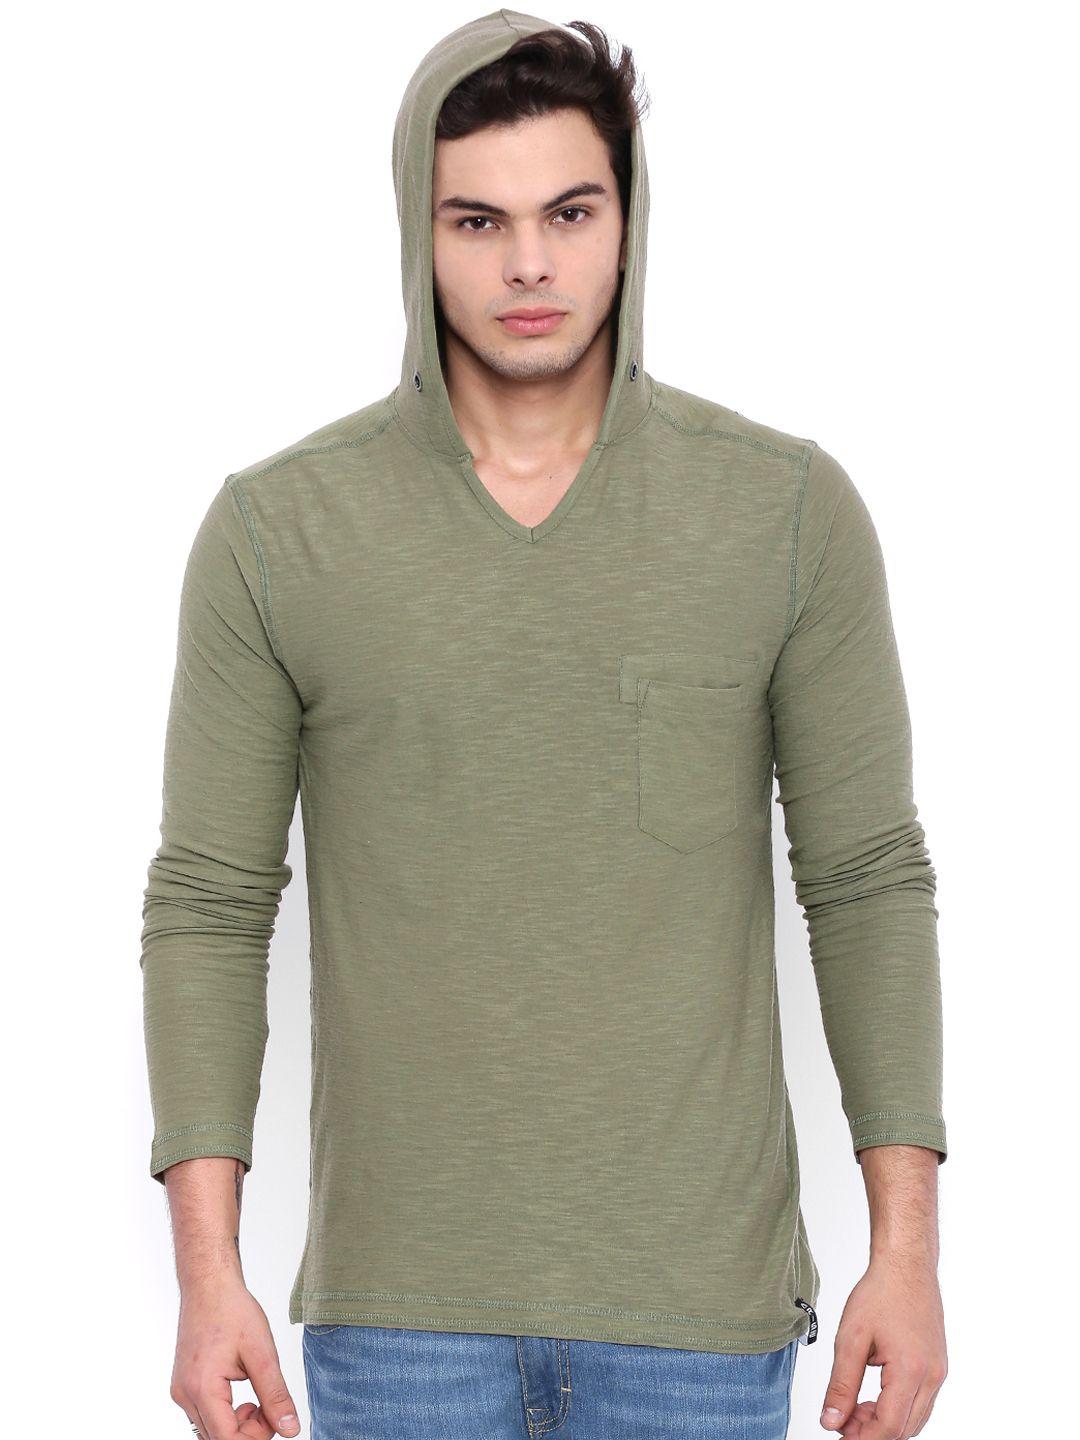 arise men olive green solid hooded t-shirt